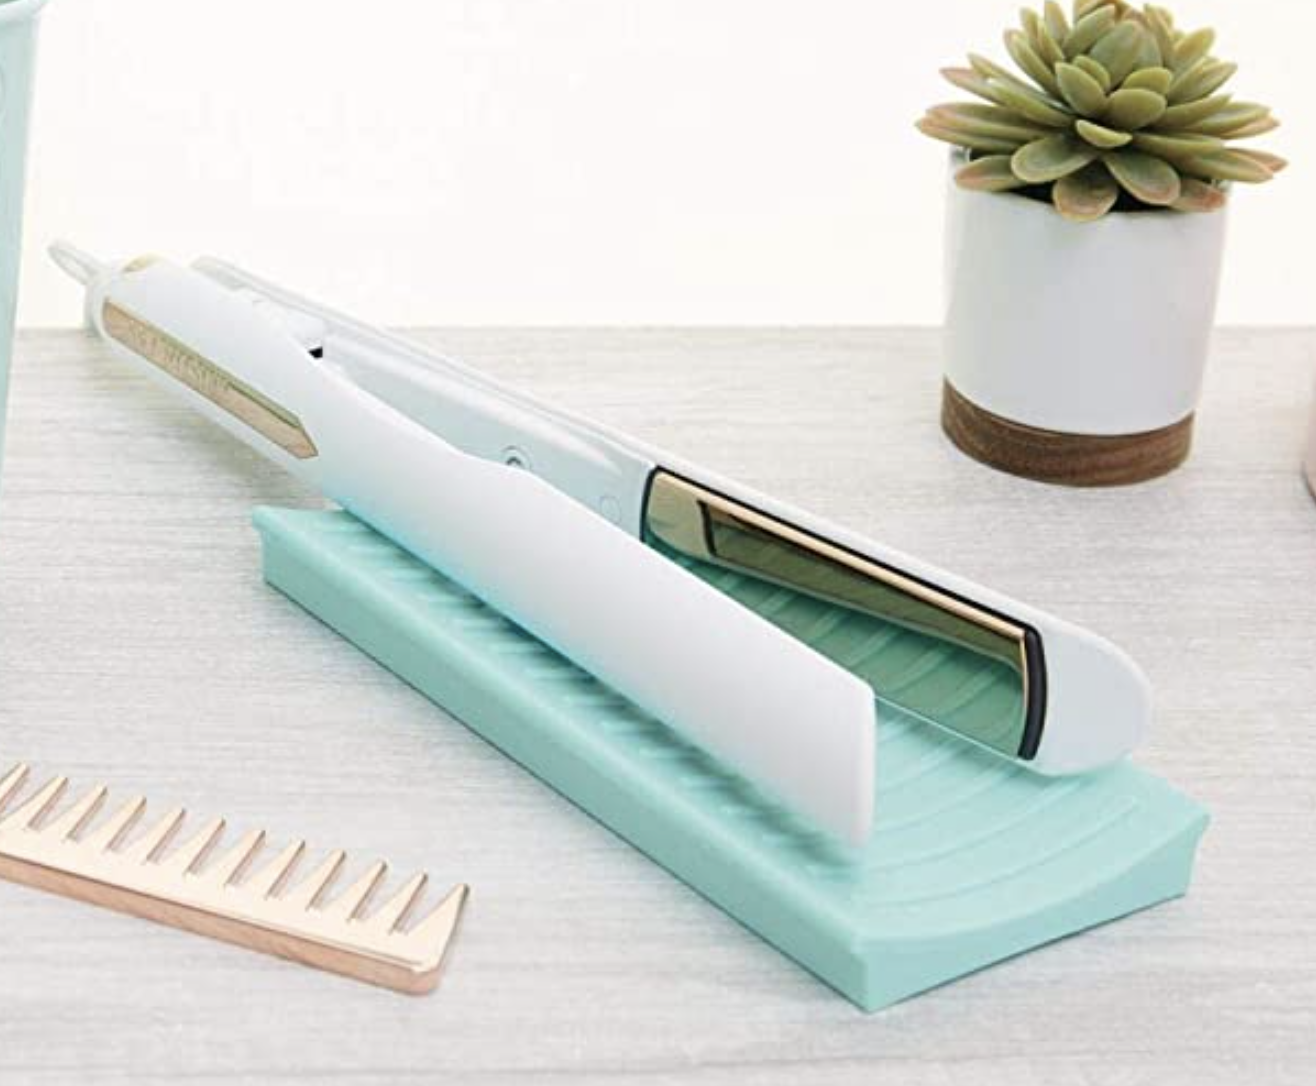 The heat mat with a flat iron on it, next to a plant and a metal comb